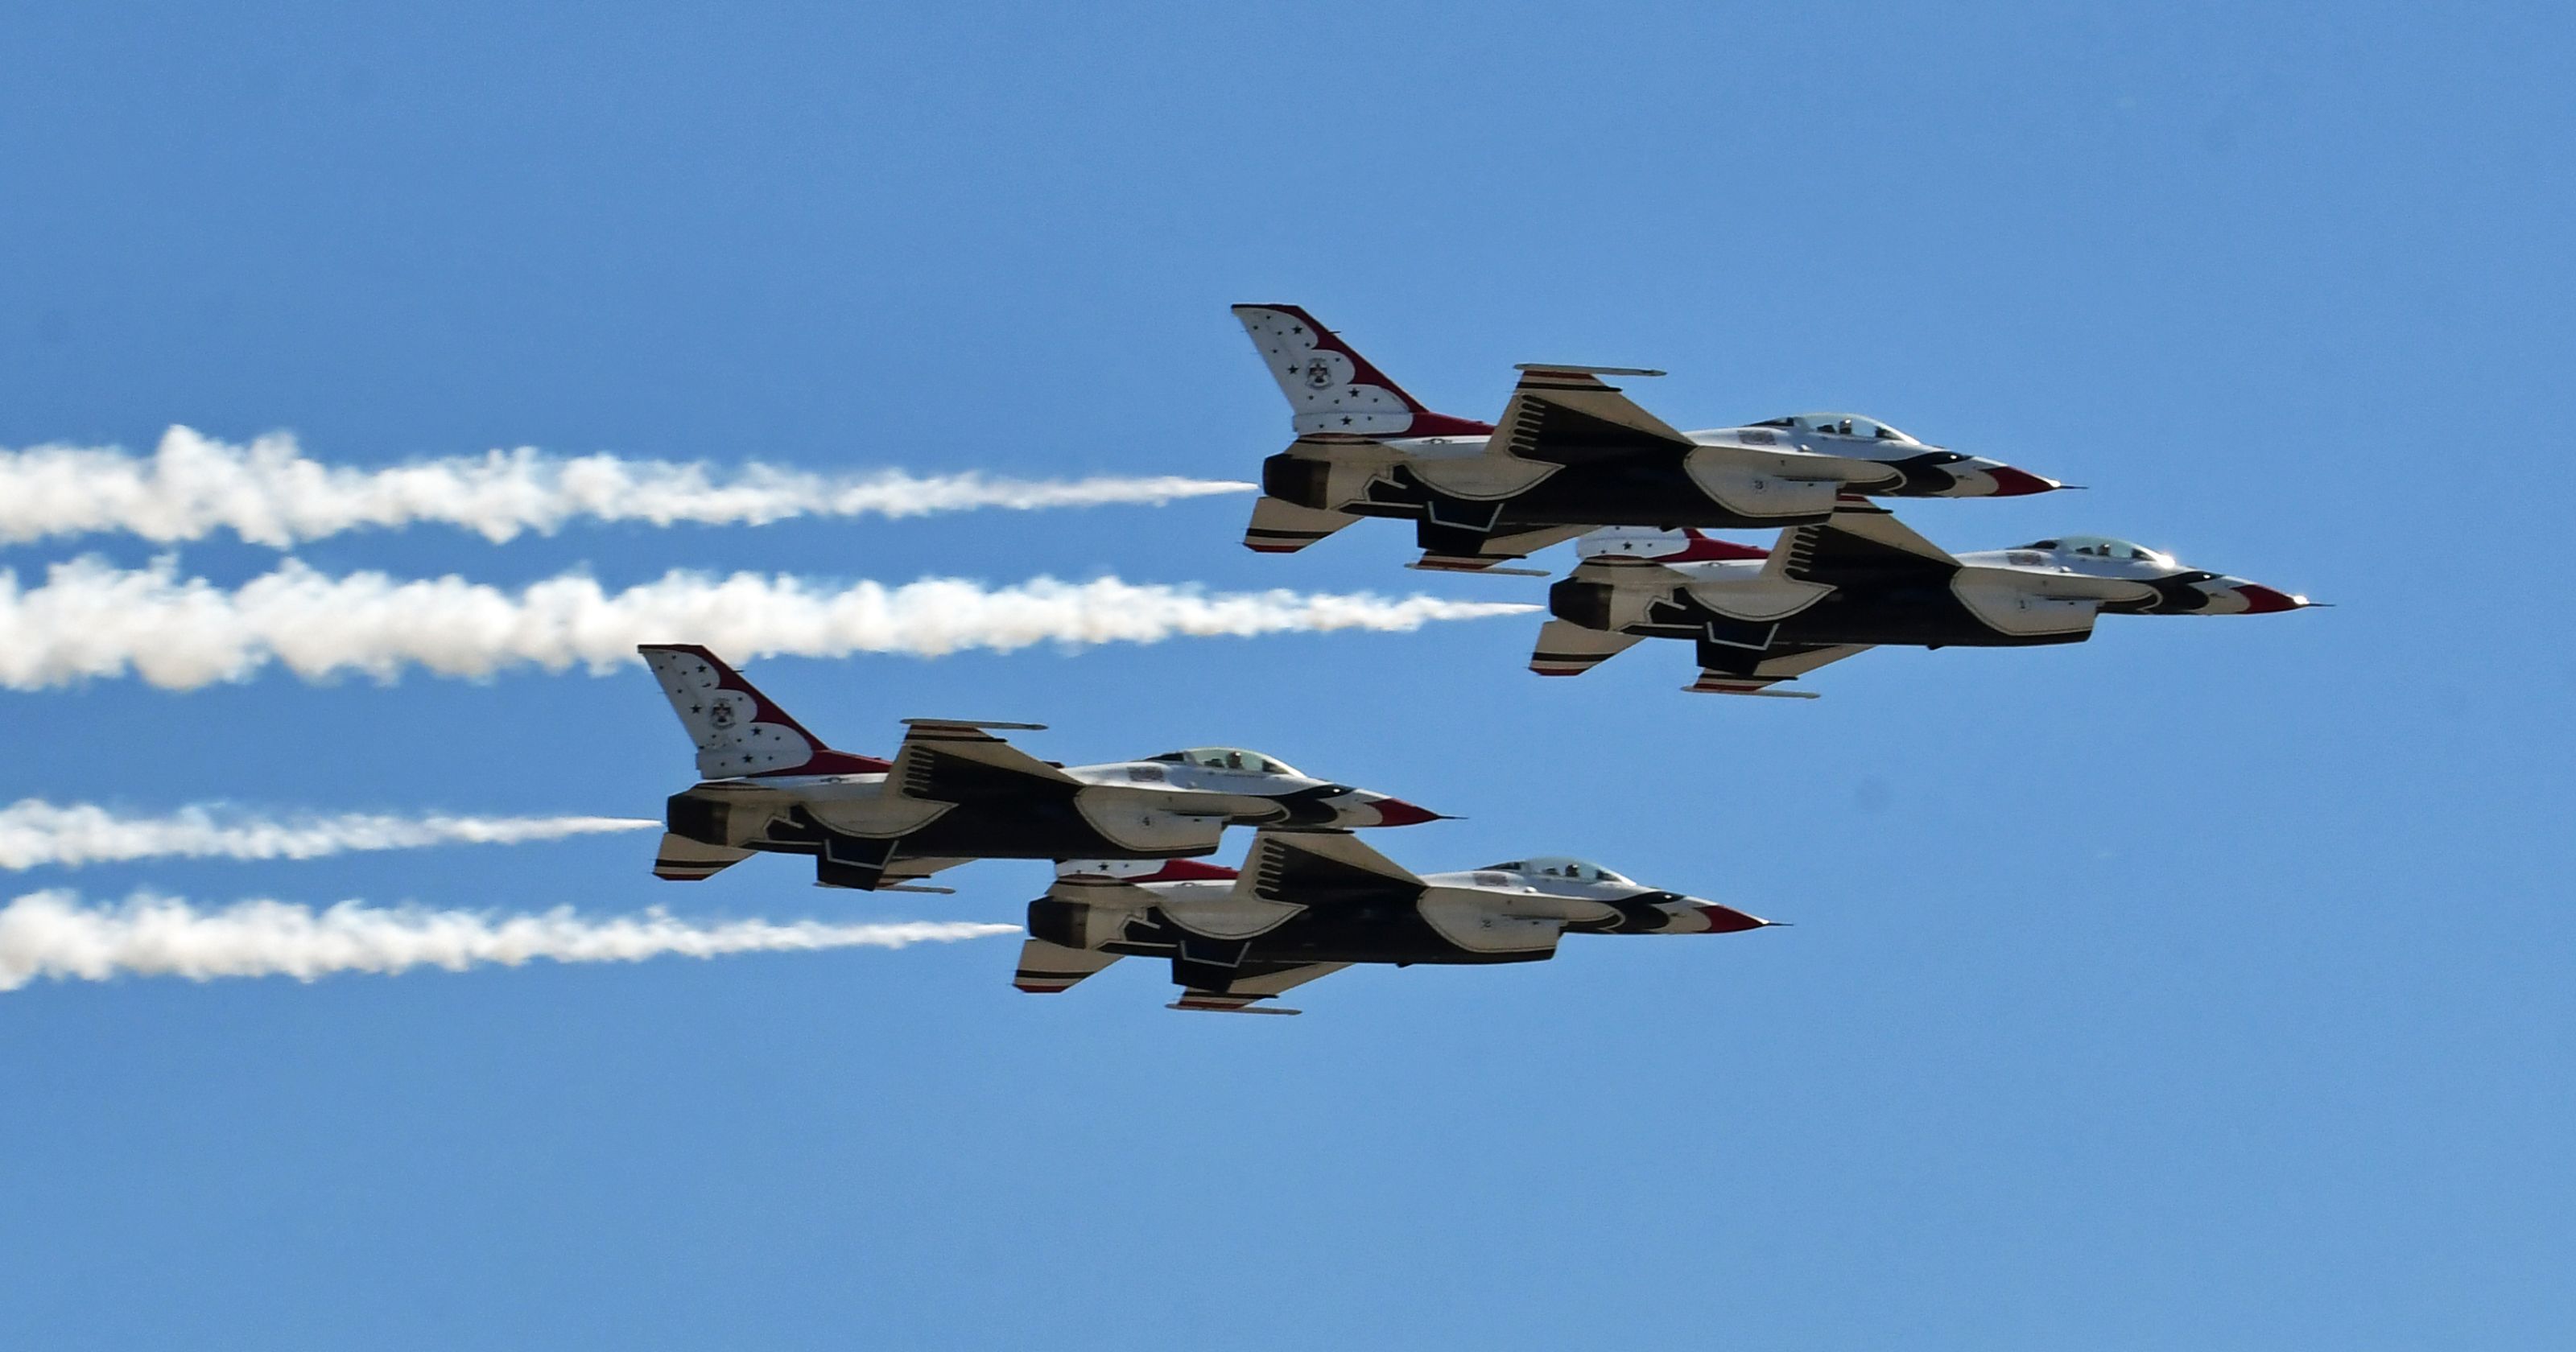 Thunderbirds arrive at Melbourne airport in advance of weekend air show